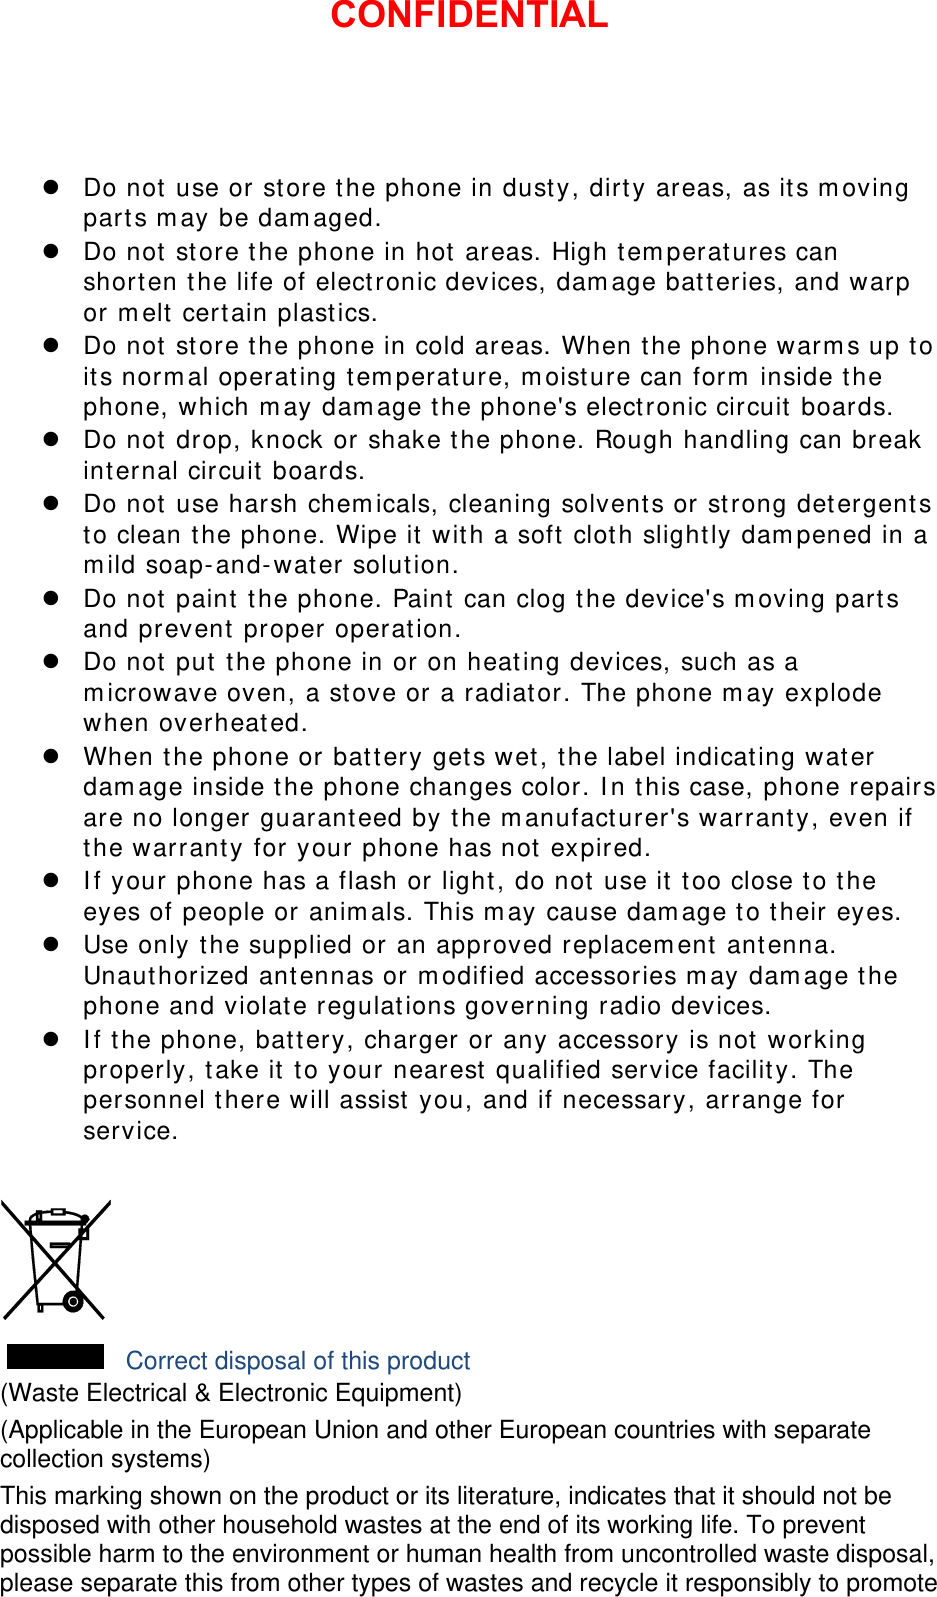  Do not use or store the phone in dusty, dirty areas, as its moving parts may be damaged.  Do not store the phone in hot areas. High temperatures can shorten the life of electronic devices, damage batteries, and warp or melt certain plastics.  Do not store the phone in cold areas. When the phone warms up to its normal operating temperature, moisture can form inside the phone, which may damage the phone&apos;s electronic circuit boards.  Do not drop, knock or shake the phone. Rough handling can break internal circuit boards.  Do not use harsh chemicals, cleaning solvents or strong detergents to clean the phone. Wipe it with a soft cloth slightly dampened in a mild soap-and-water solution.  Do not paint the phone. Paint can clog the device&apos;s moving parts and prevent proper operation.  Do not put the phone in or on heating devices, such as a microwave oven, a stove or a radiator. The phone may explode when overheated.  When the phone or battery gets wet, the label indicating water damage inside the phone changes color. In this case, phone repairs are no longer guaranteed by the manufacturer&apos;s warranty, even if the warranty for your phone has not expired.   If your phone has a flash or light, do not use it too close to the eyes of people or animals. This may cause damage to their eyes.  Use only the supplied or an approved replacement antenna. Unauthorized antennas or modified accessories may damage the phone and violate regulations governing radio devices.  If the phone, battery, charger or any accessory is not working properly, take it to your nearest qualified service facility. The personnel there will assist you, and if necessary, arrange for service.   Correct disposal of this product (Waste Electrical &amp; Electronic Equipment) (Applicable in the European Union and other European countries with separate collection systems) This marking shown on the product or its literature, indicates that it should not be disposed with other household wastes at the end of its working life. To prevent possible harm to the environment or human health from uncontrolled waste disposal, please separate this from other types of wastes and recycle it responsibly to promote CONFIDENTIAL